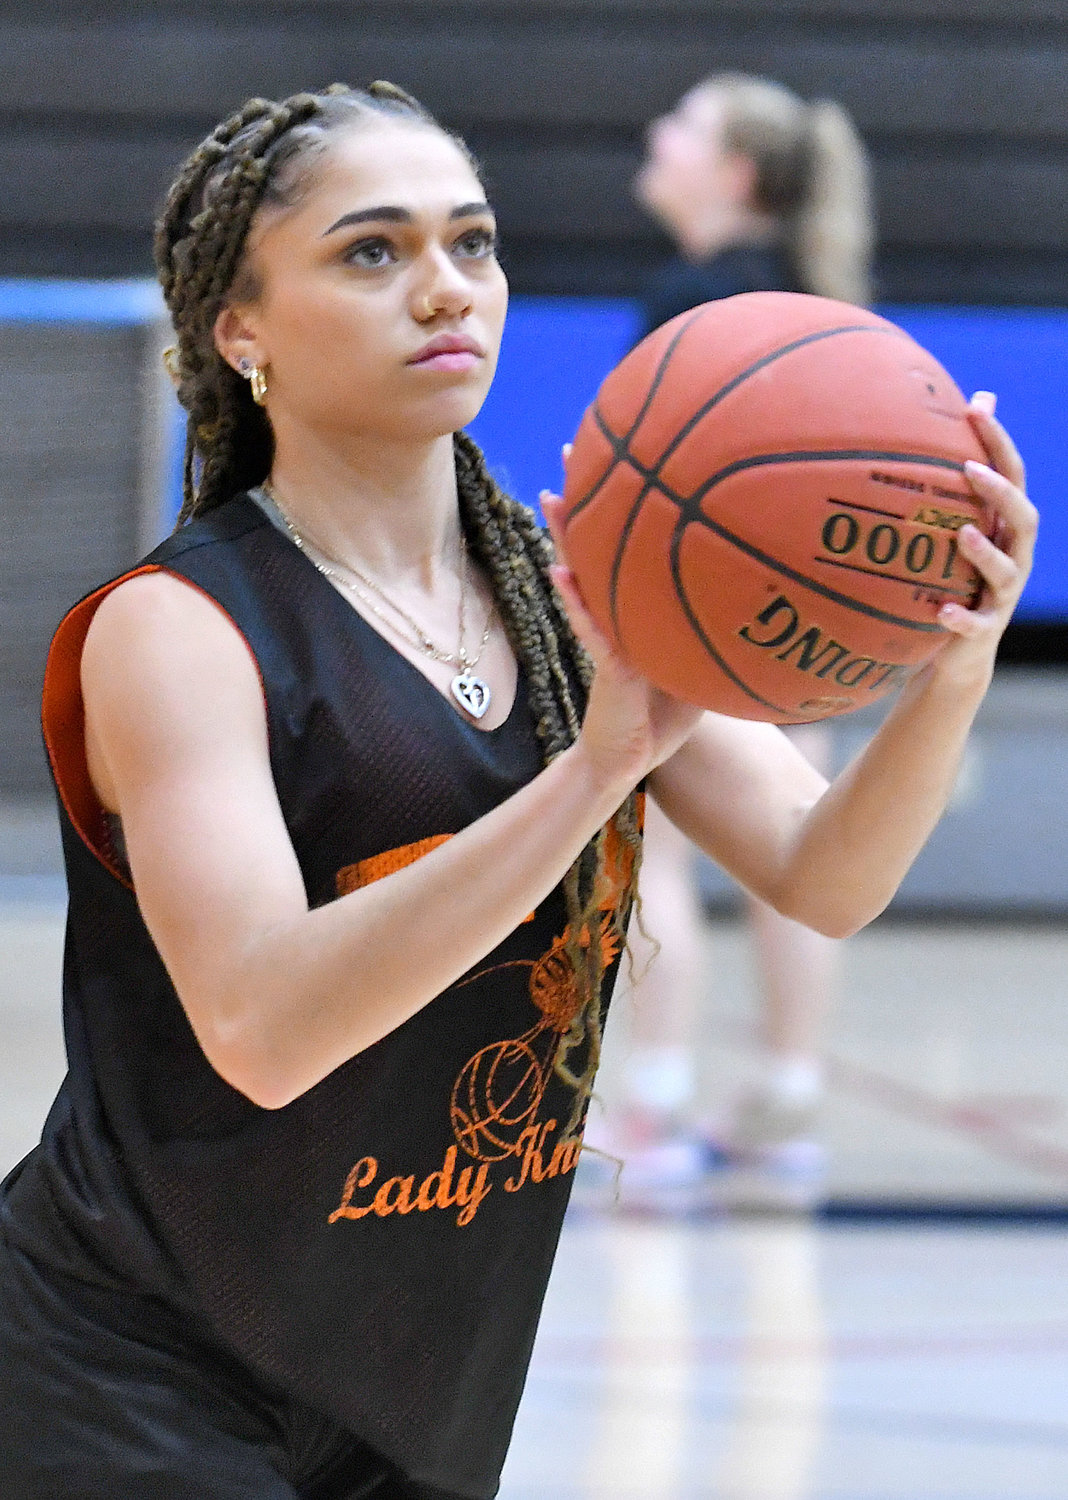 EYES ON THE HOOP — Rome Free Academy senior guard Alysa Jackson steps up for a shot in practice on Tuesday. Jackson and the Black Knights were 15-7 last season and return to action with a non-league game at West Genesee on Dec. 1.